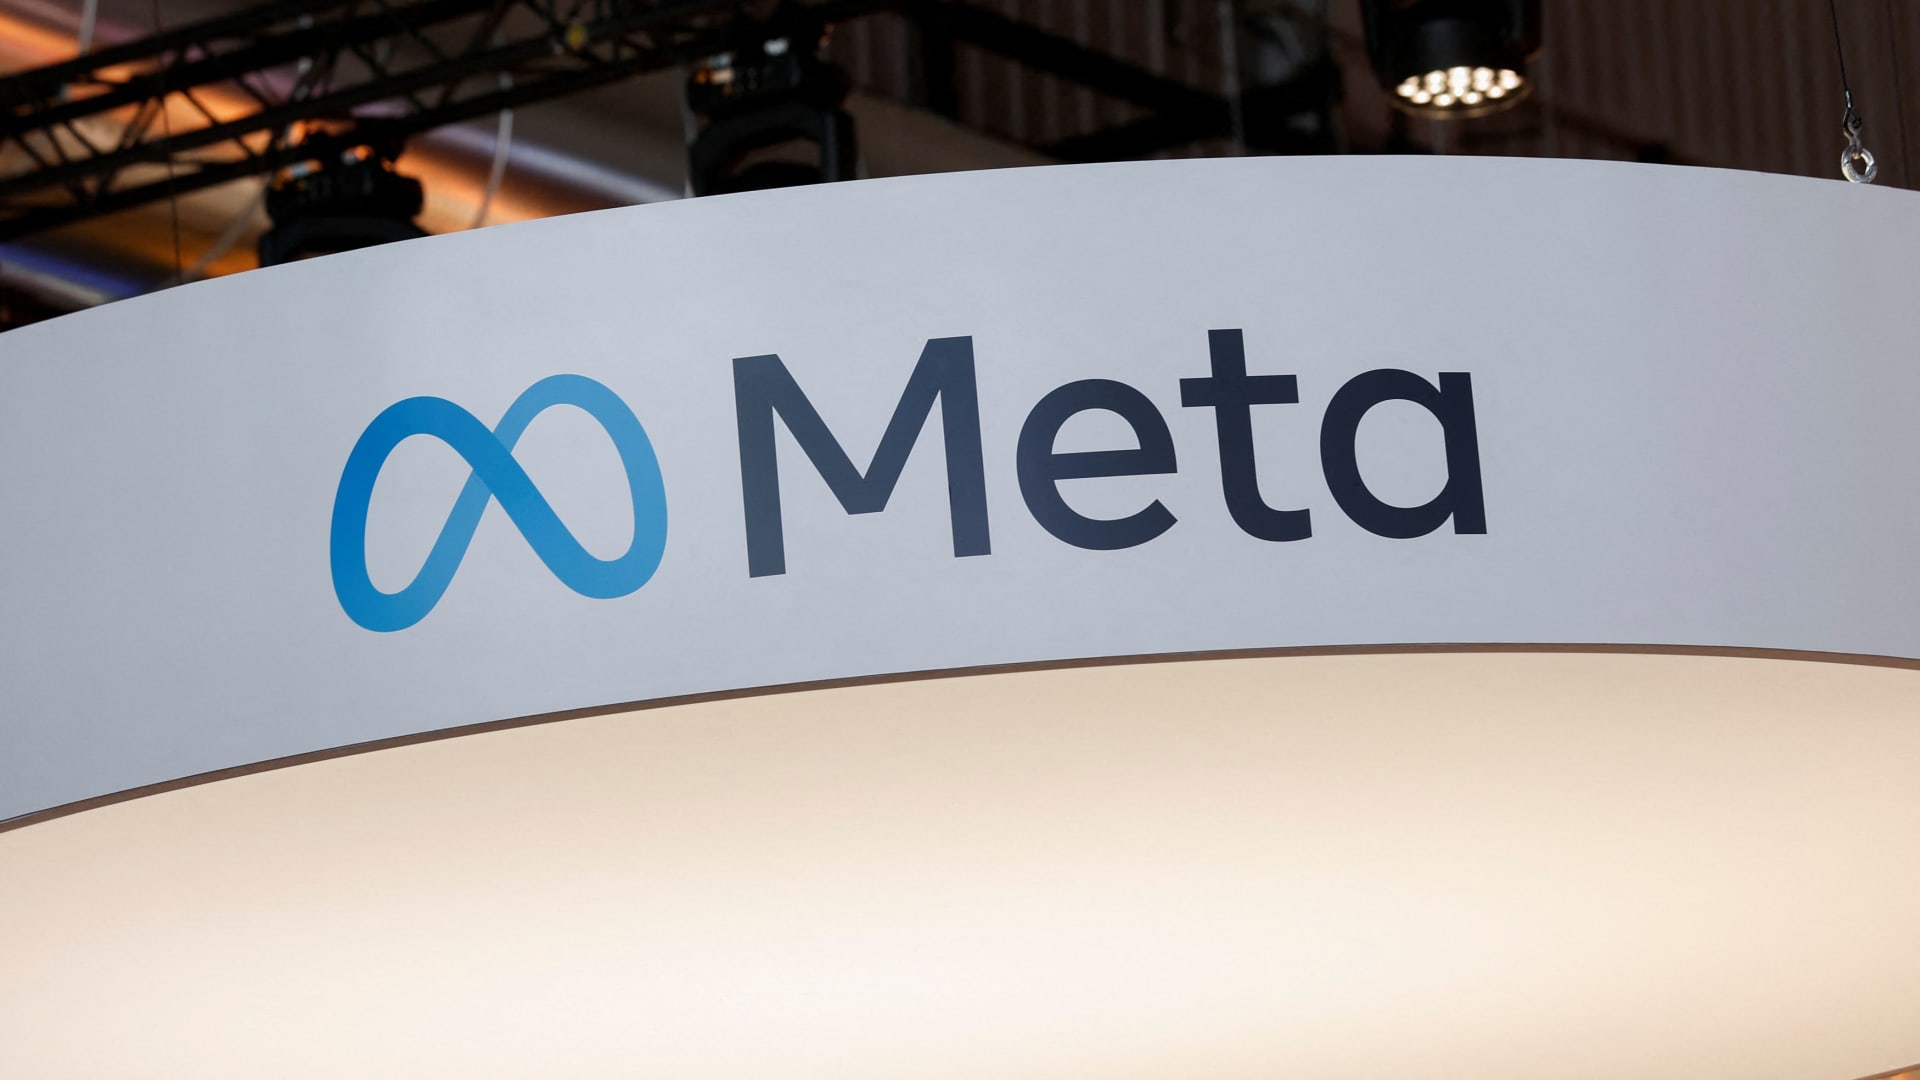 Meta is paying first-ever dividend, authorizes $50 billion buyback